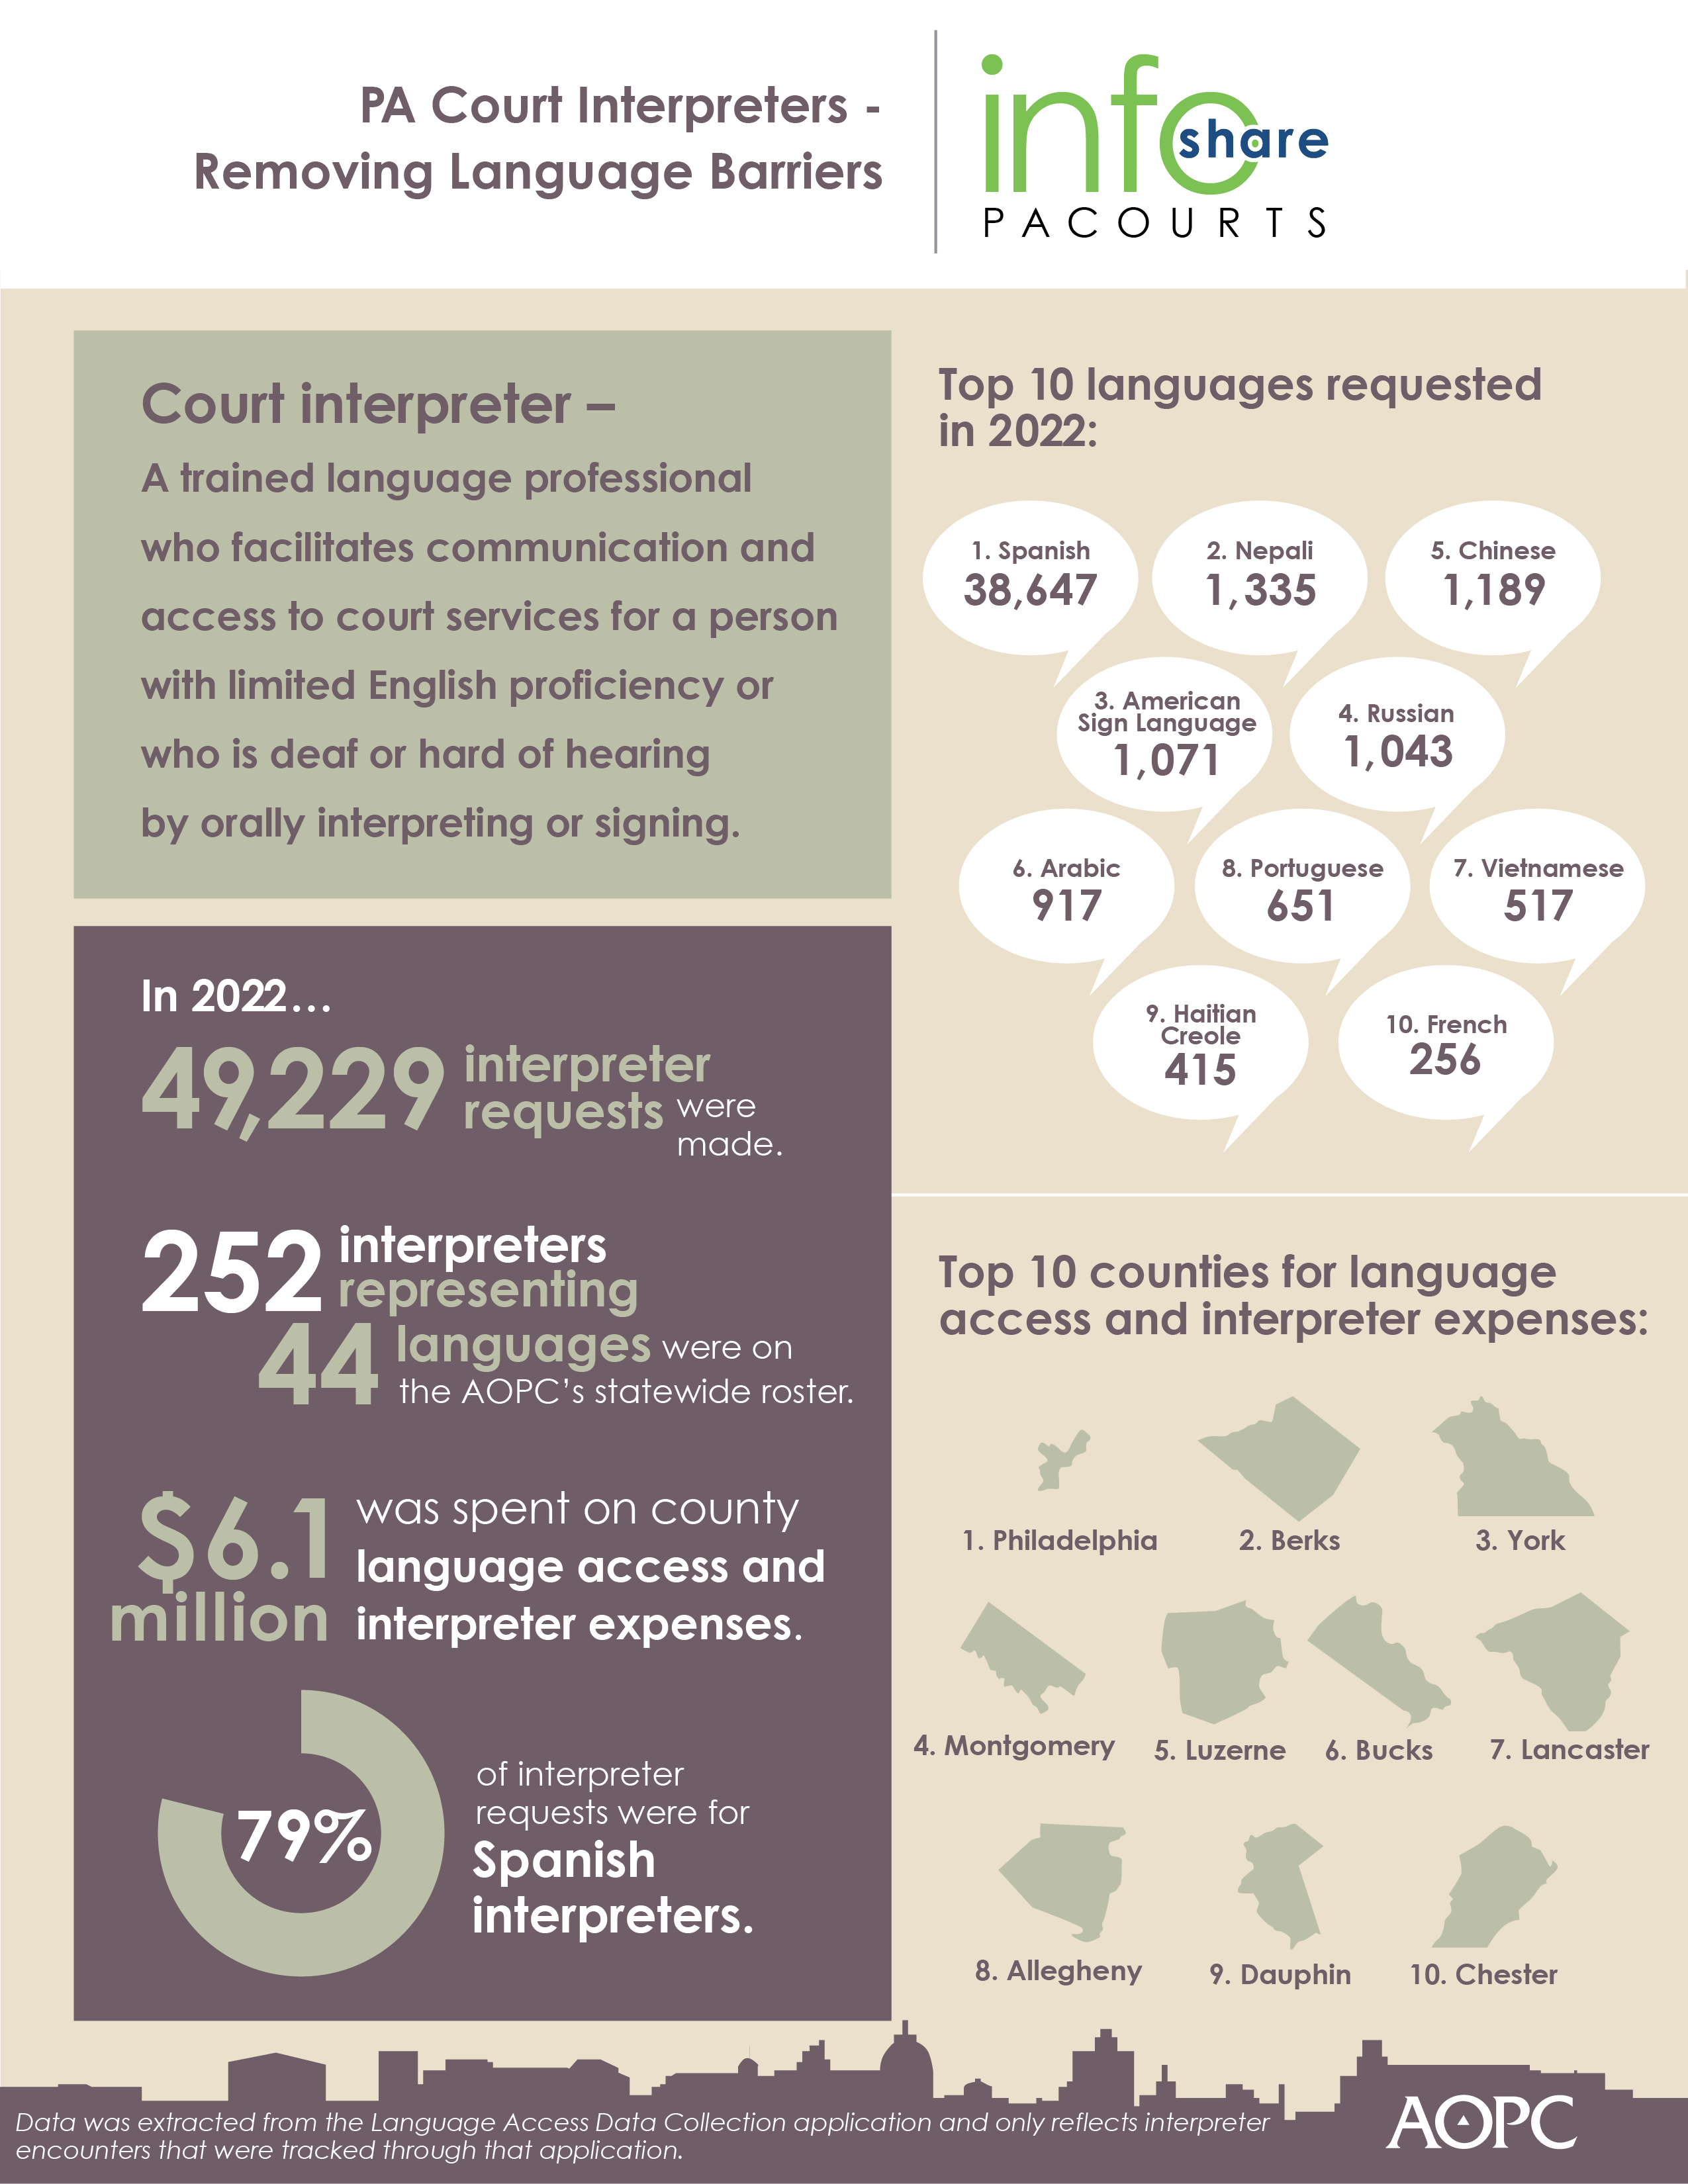 Pennsylvania Courts facilitated 49,229 statewide requests for interpreters in 2022 – a 36 percent increase from the year prior. The infographic below highlights key court data including the top 10 counties for language access and interpreter expenses as well as the top 10 languages requested.